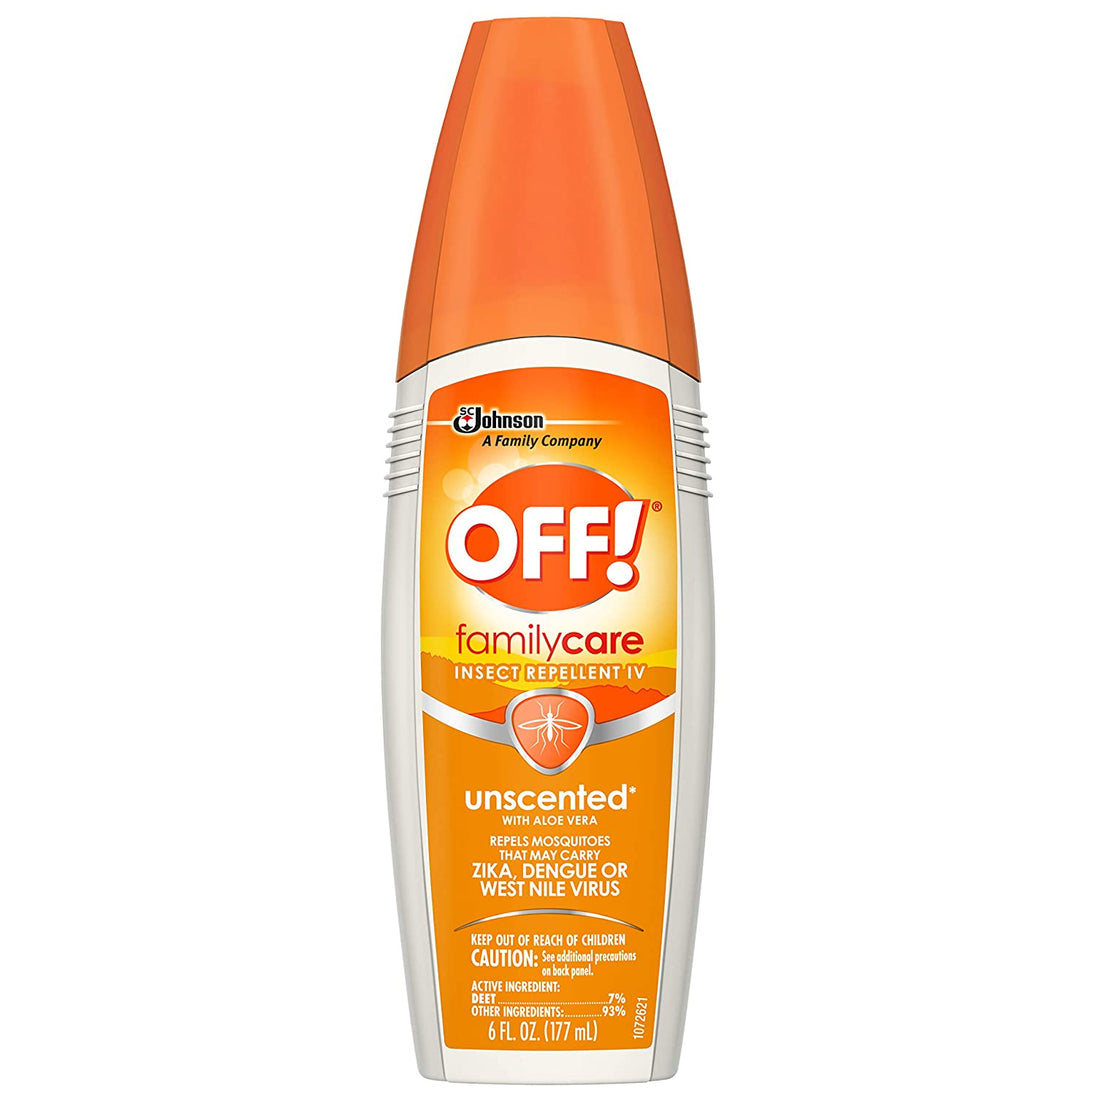 OFF! Lot of 6x FamilyCare Unscented Insect Repellent Bug spray Aloe-Vera 7% Deet 6 oz - resaled - OFF! - 046500018350